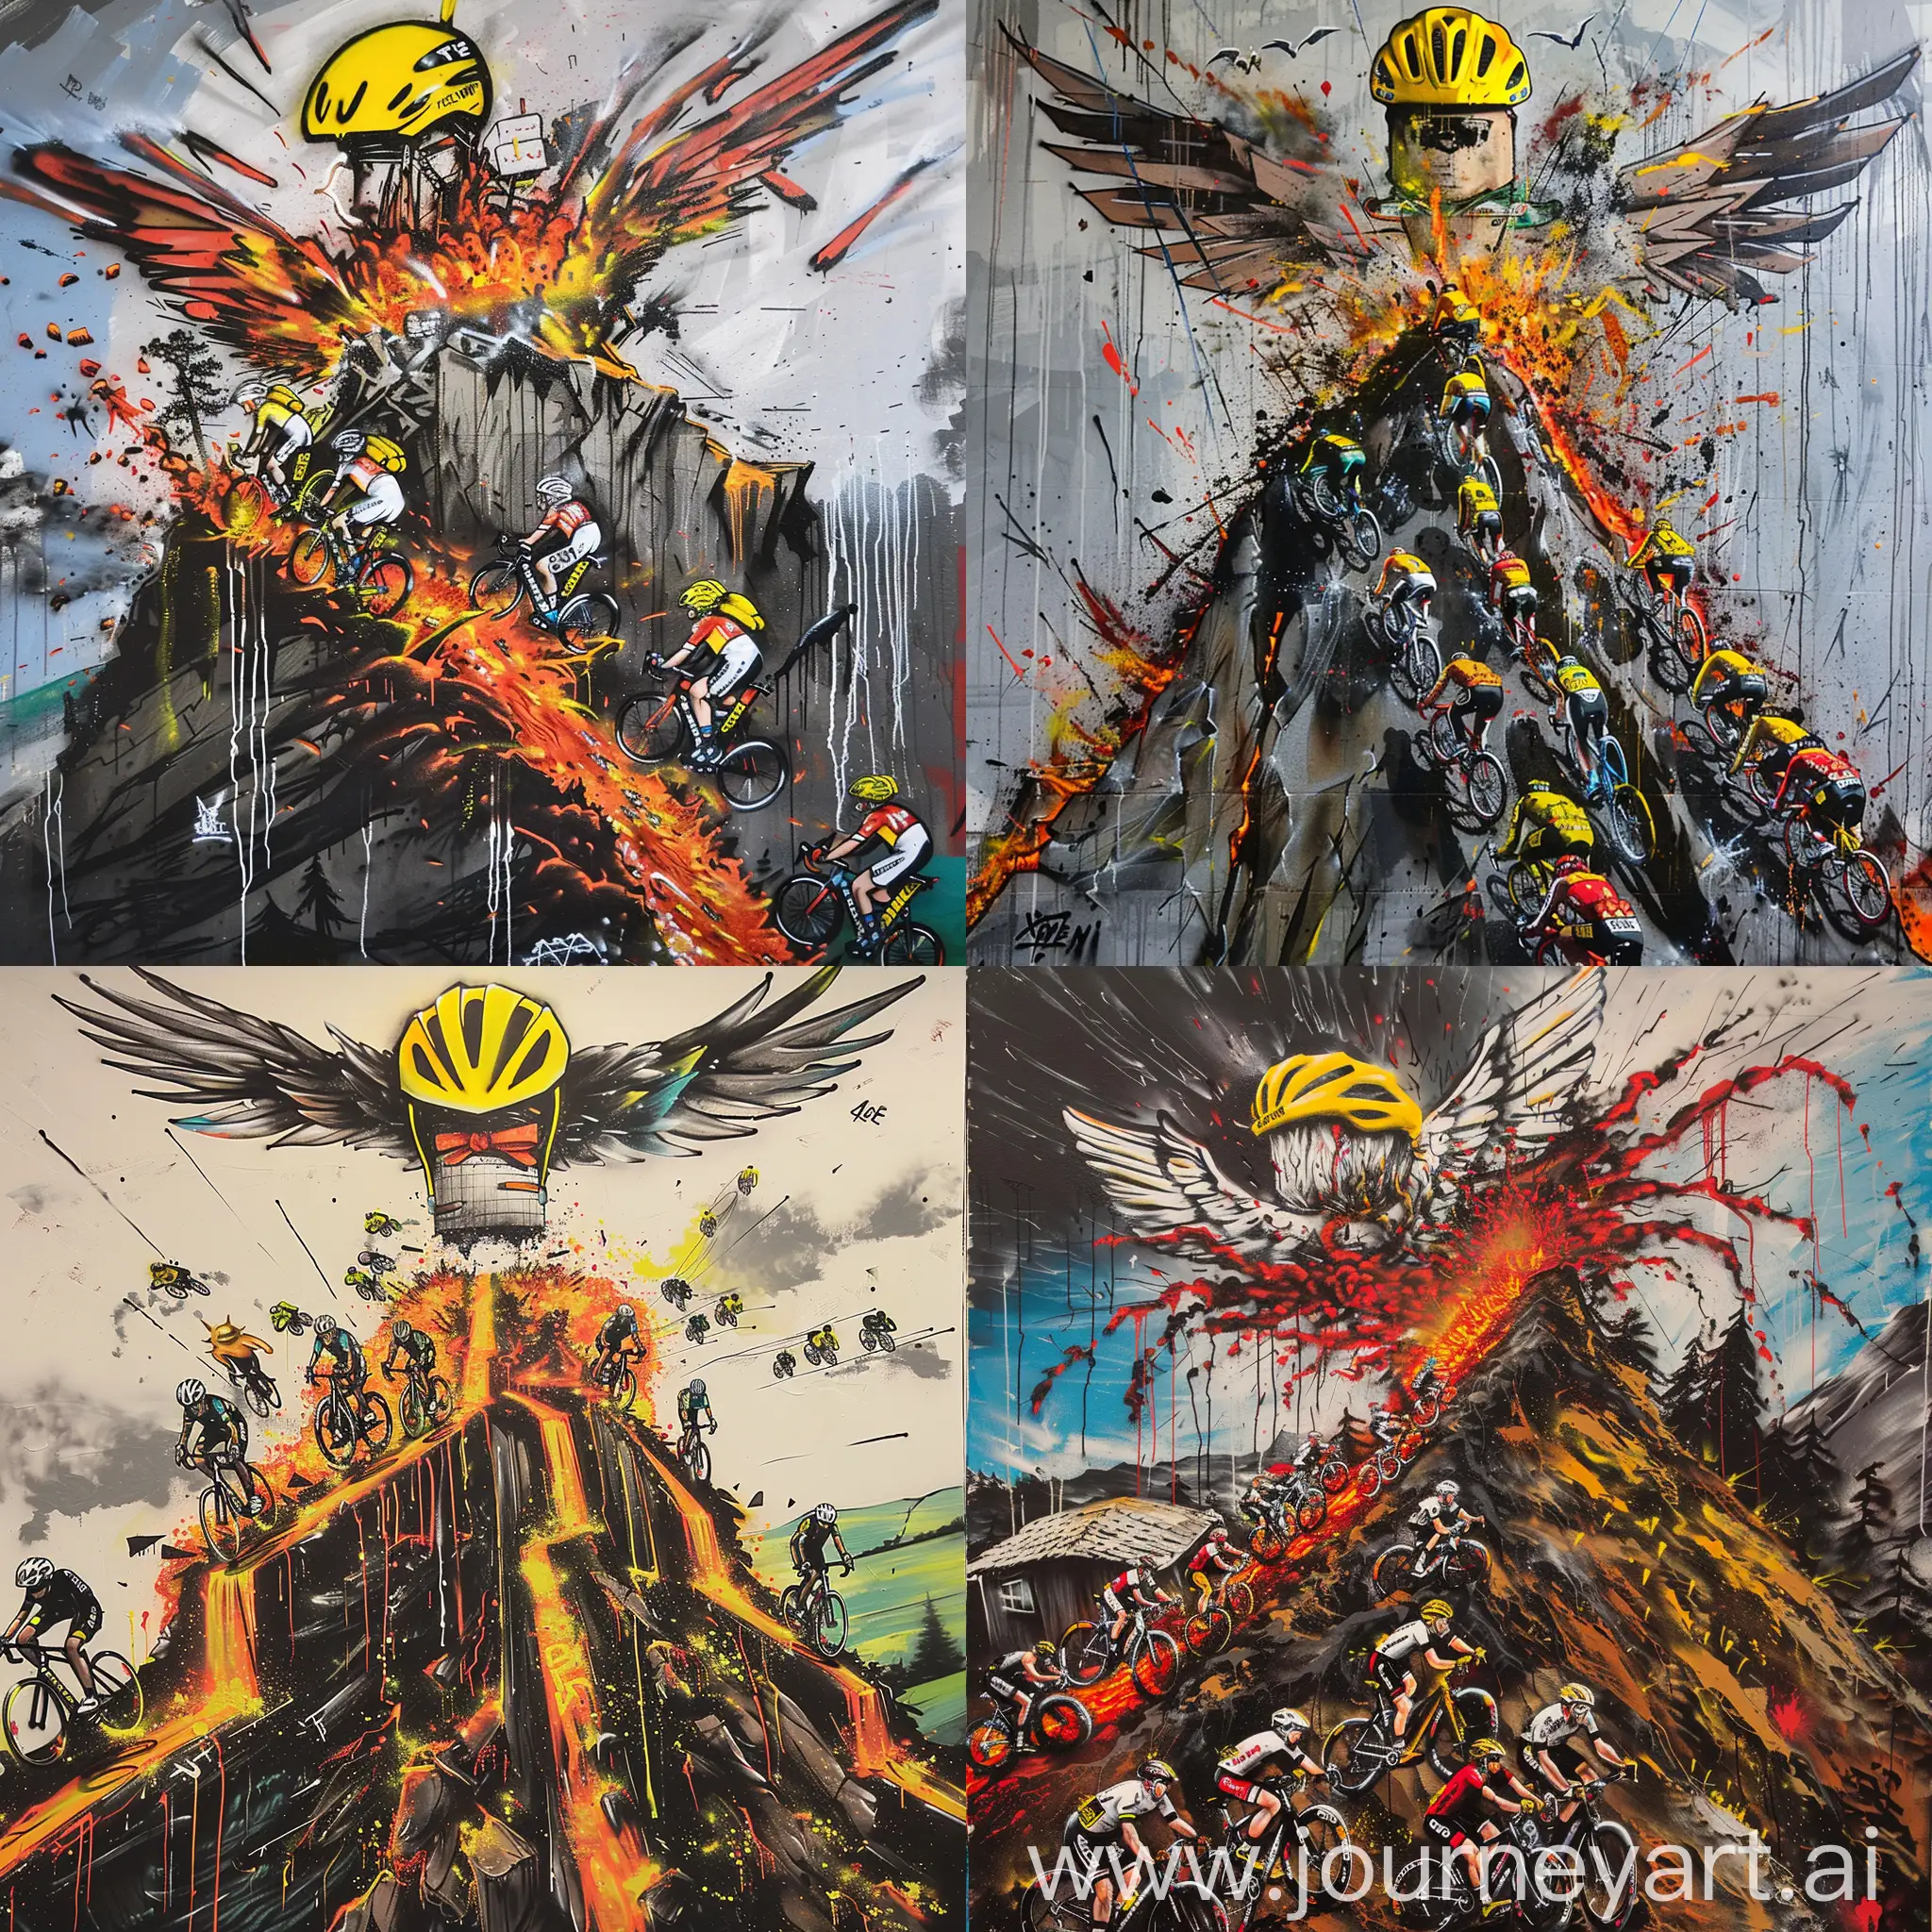 Make a graffiti painting of the Tour de France, except the riders are biking up a steep incline on a volcano. A lot of lava is ejected from the volcano. Above the volcano is a farm with wings. The farm is wearing a yellow biking helmet
